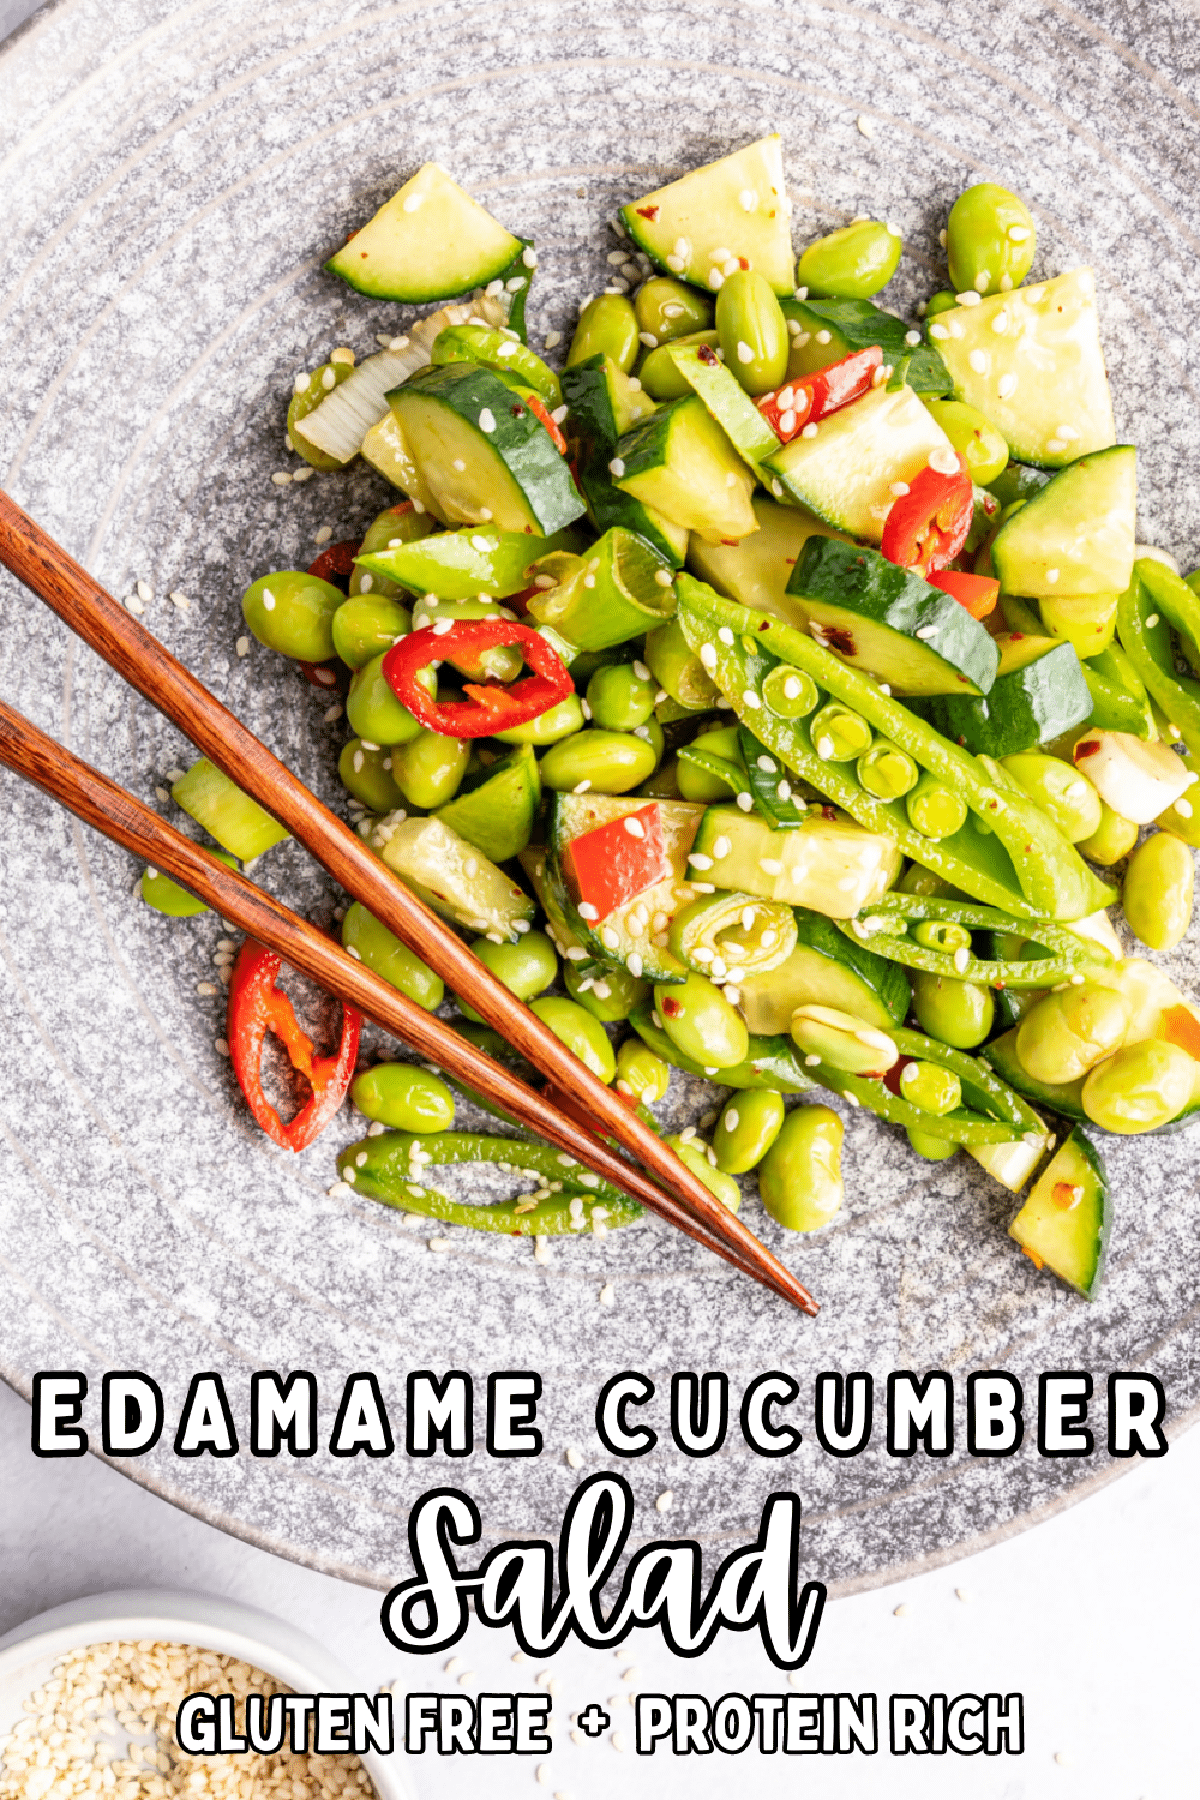 Overhead view of a single serving of Asian cucumber salad in a grey bowl with wooden chopsticks: salad has edamame, cucumber, snap peas, red bell pepper, green onions, chili peppers and sesame seeds.